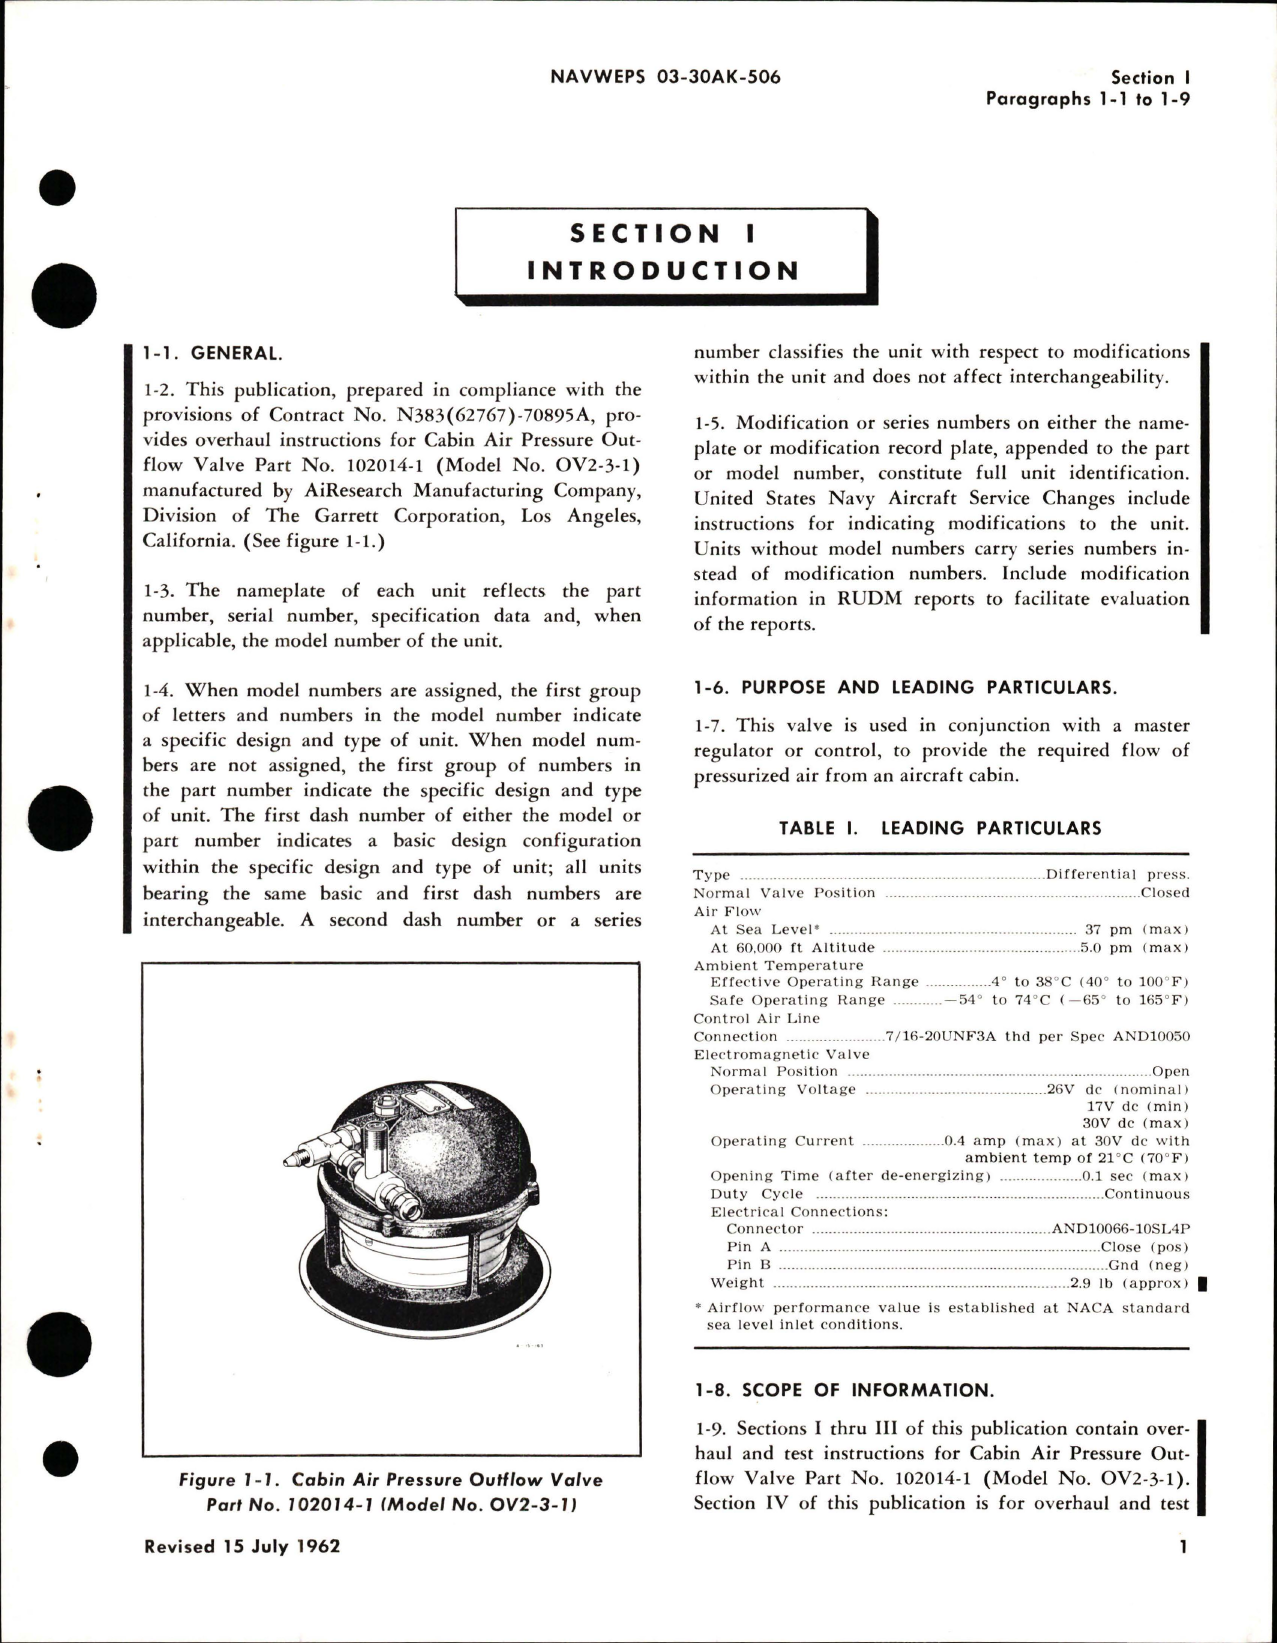 Sample page 5 from AirCorps Library document: Overhaul Instructions for Cabin Air Pressure Outflow Valves